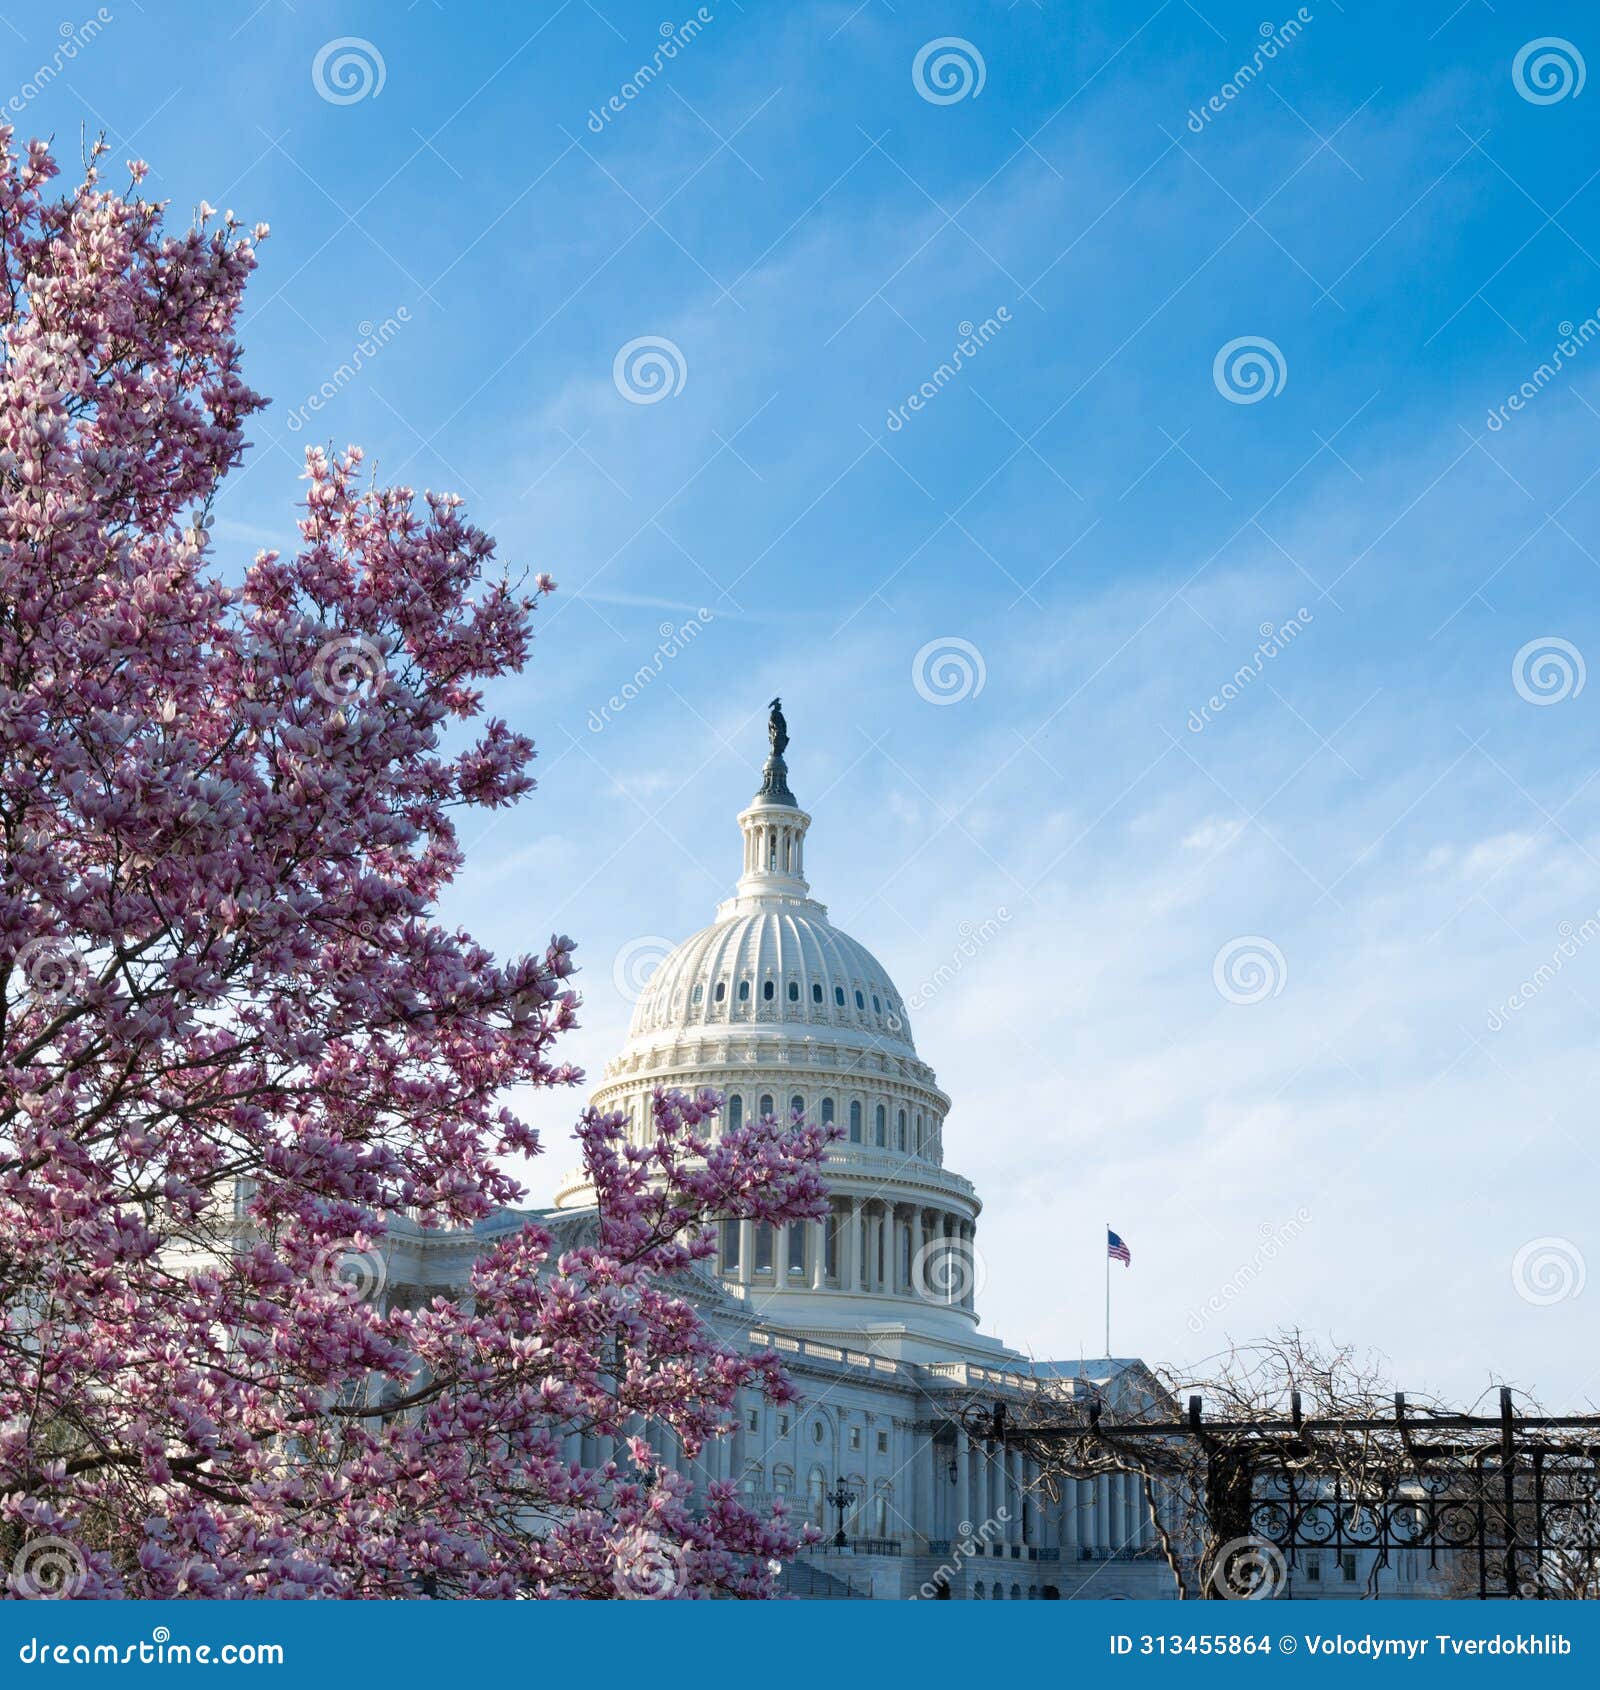 capitol building in blossom tree. spring capitol hill, washington dc. capitols dome in spring. united states capitol